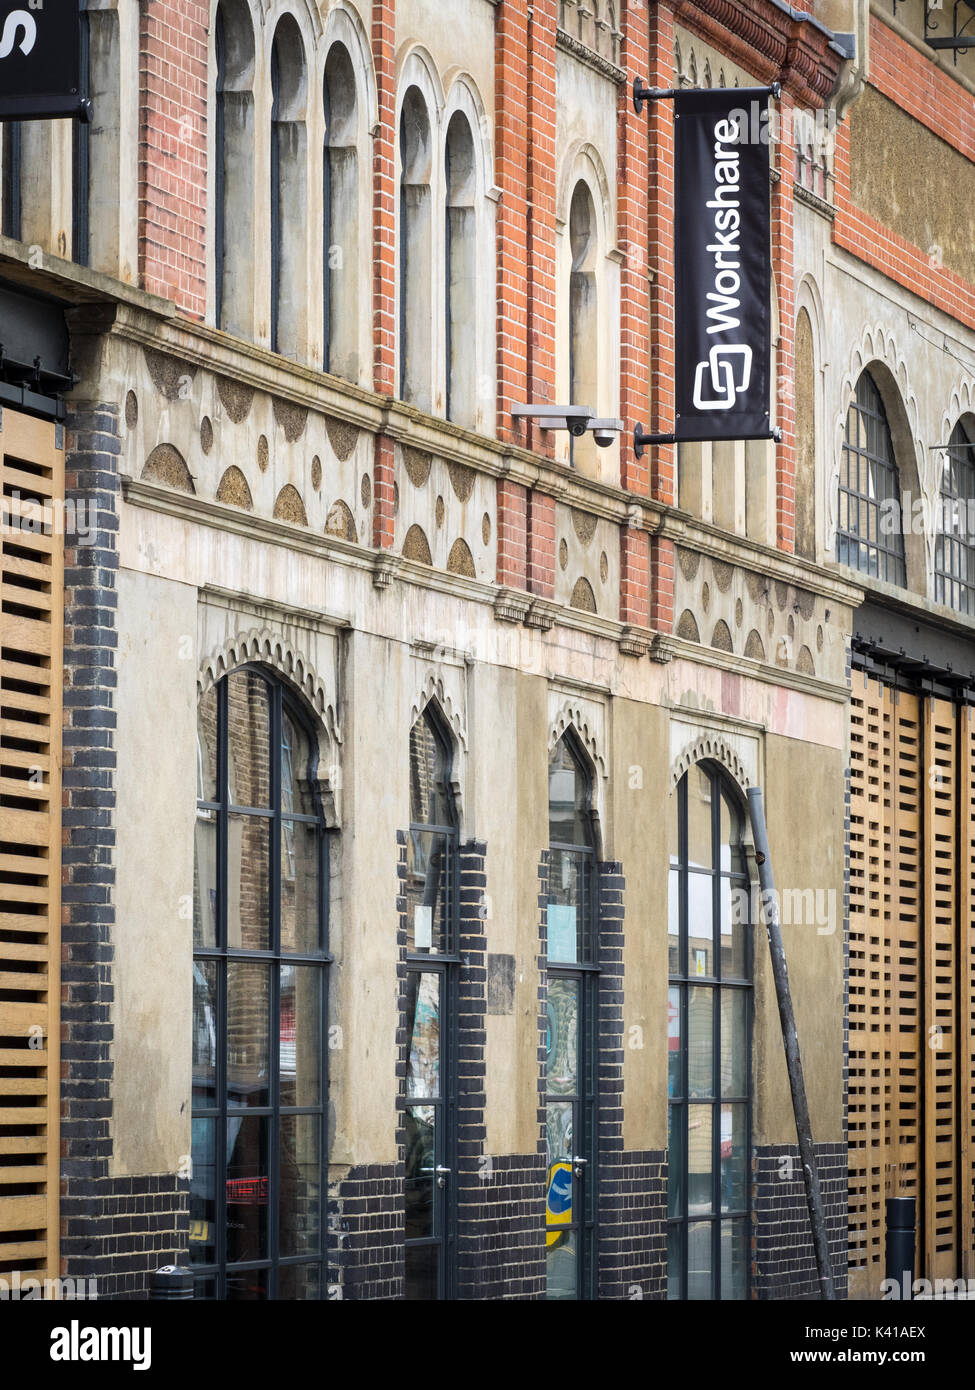 Workshare Software Company Head Office in Fashion Street in London's East End Stock Photo